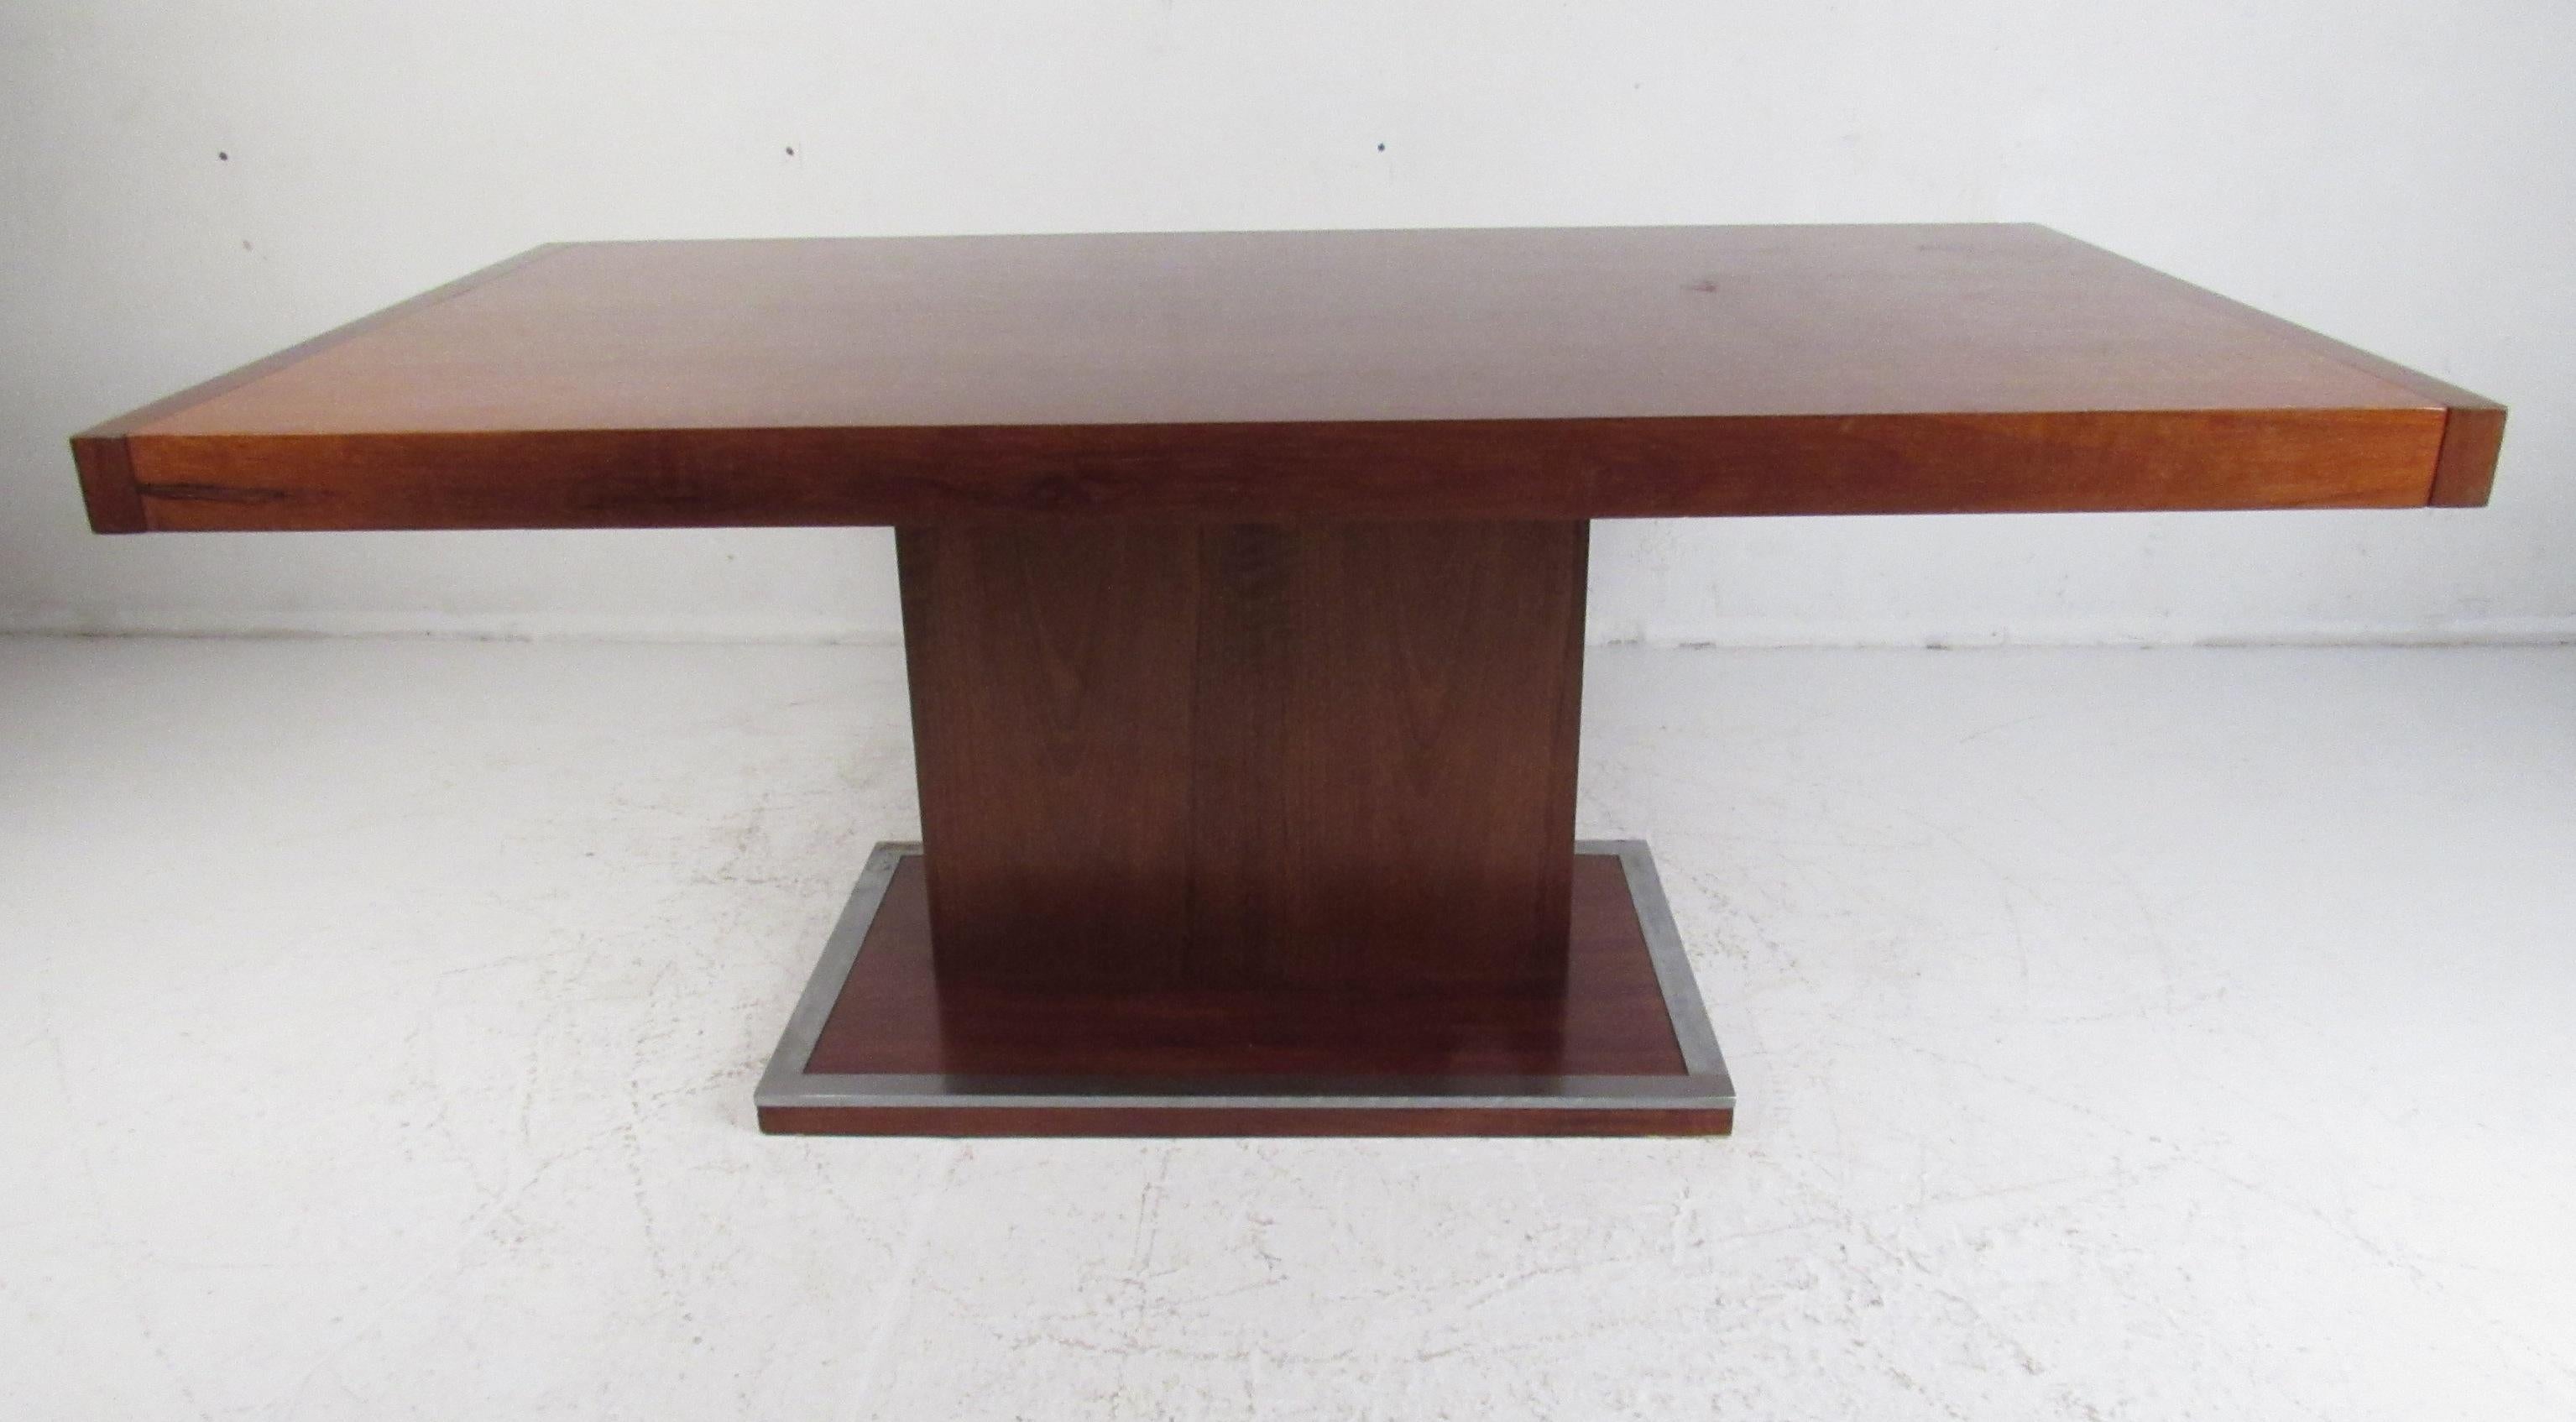 This stunning vintage modern dining table features a unique pedestal base with metal trim wrapped around the edges. The Art Deco style design, clean lines, and elegant walnut wood grain shows quality craftsmanship. This attractive mid-century dining